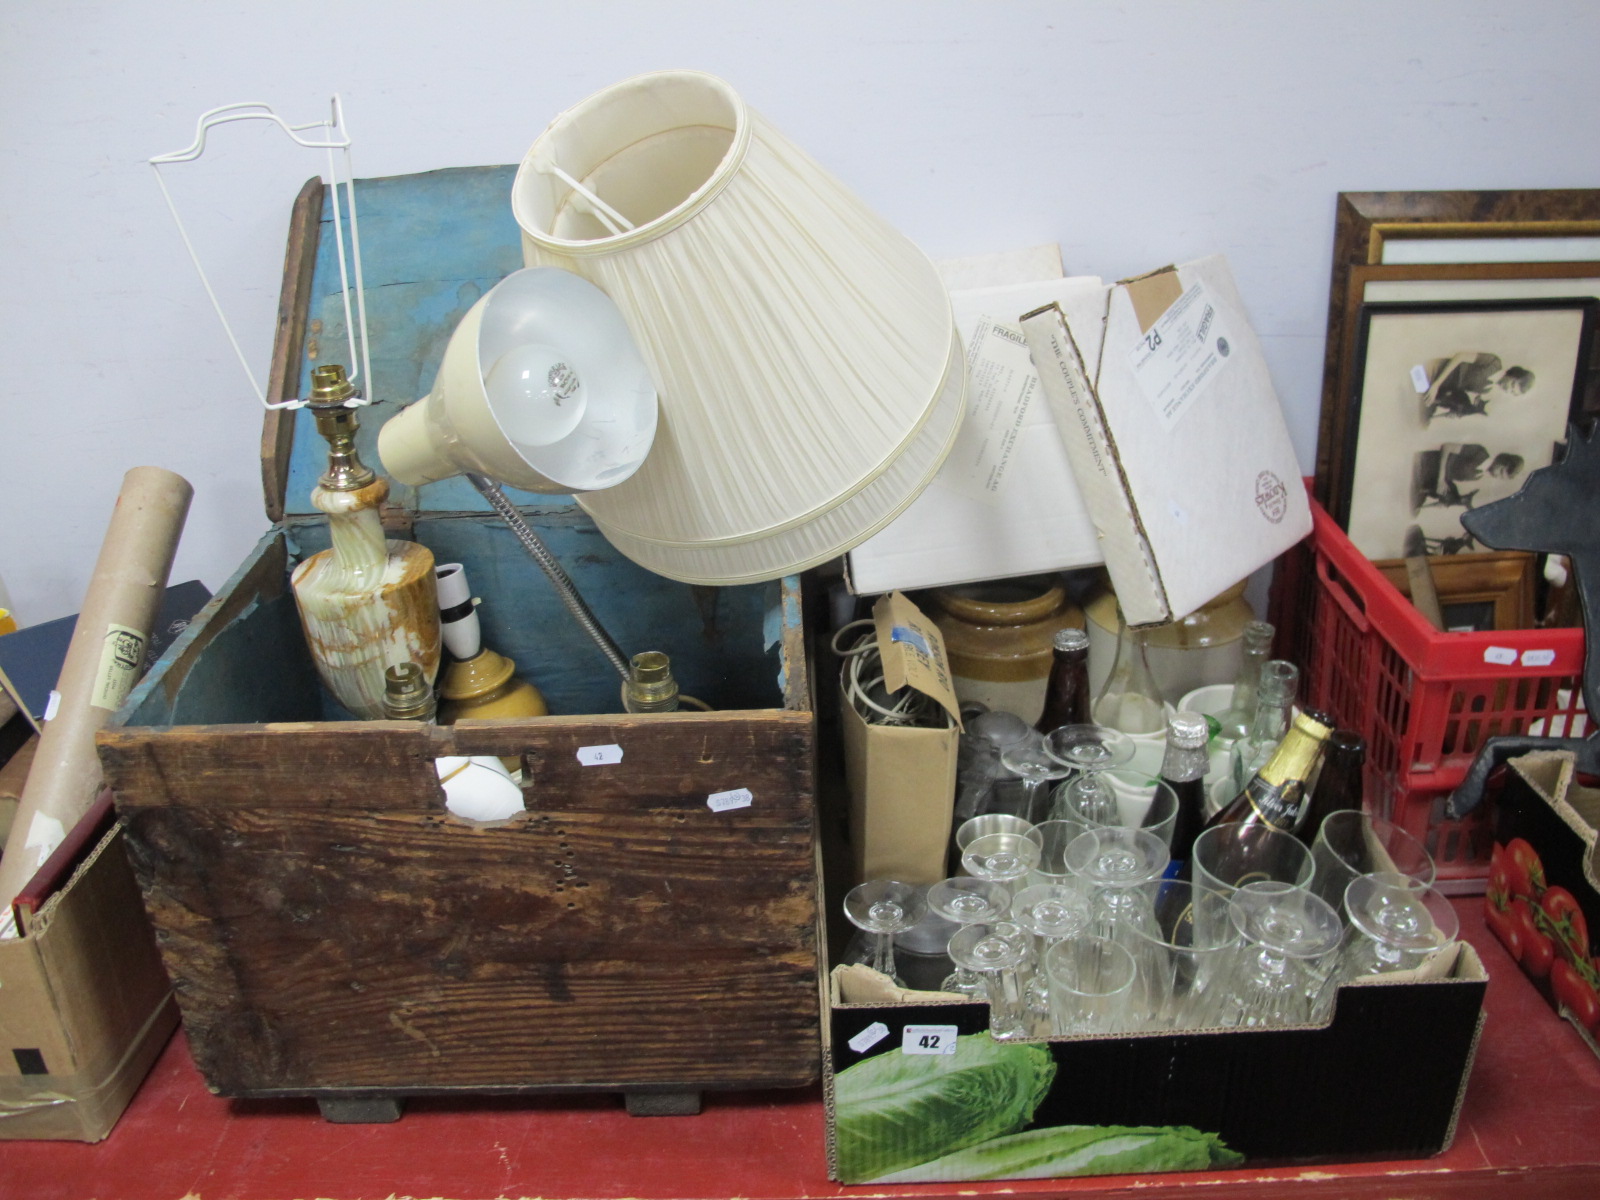 Bottles, Glassware, Stoneware, Lamps, etc, in pine box and box.